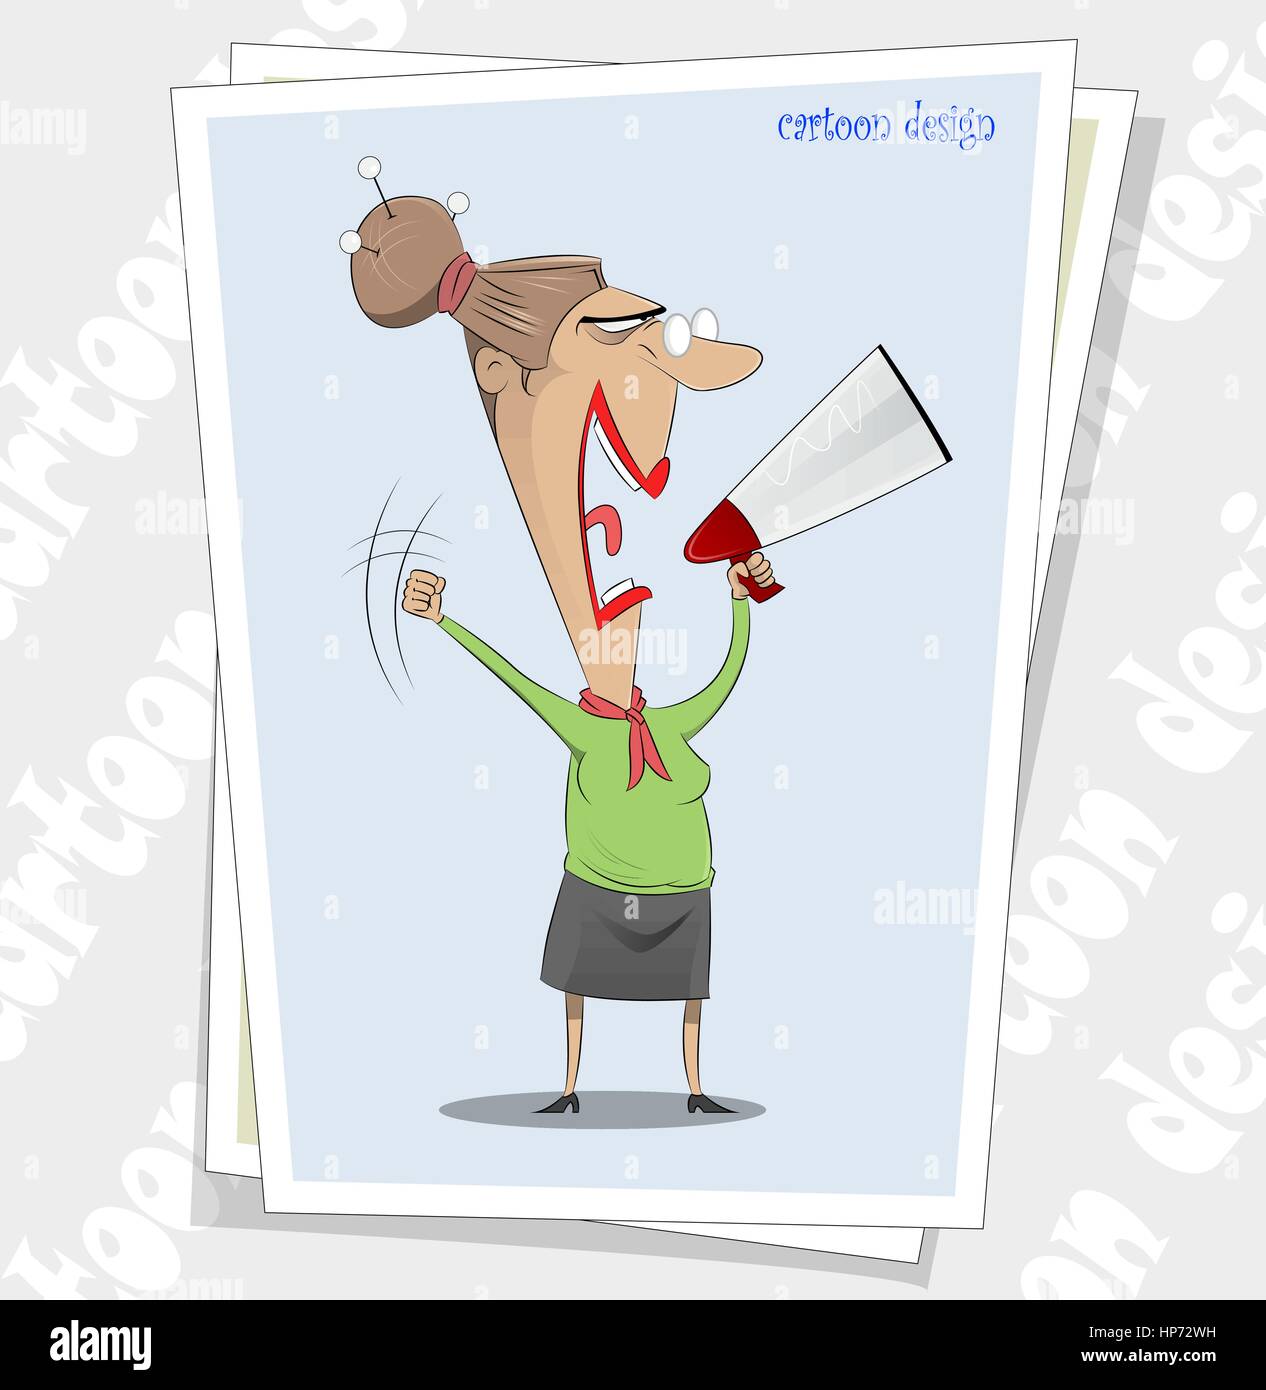 Ugly and angry looking senior cartoon Stock Vector